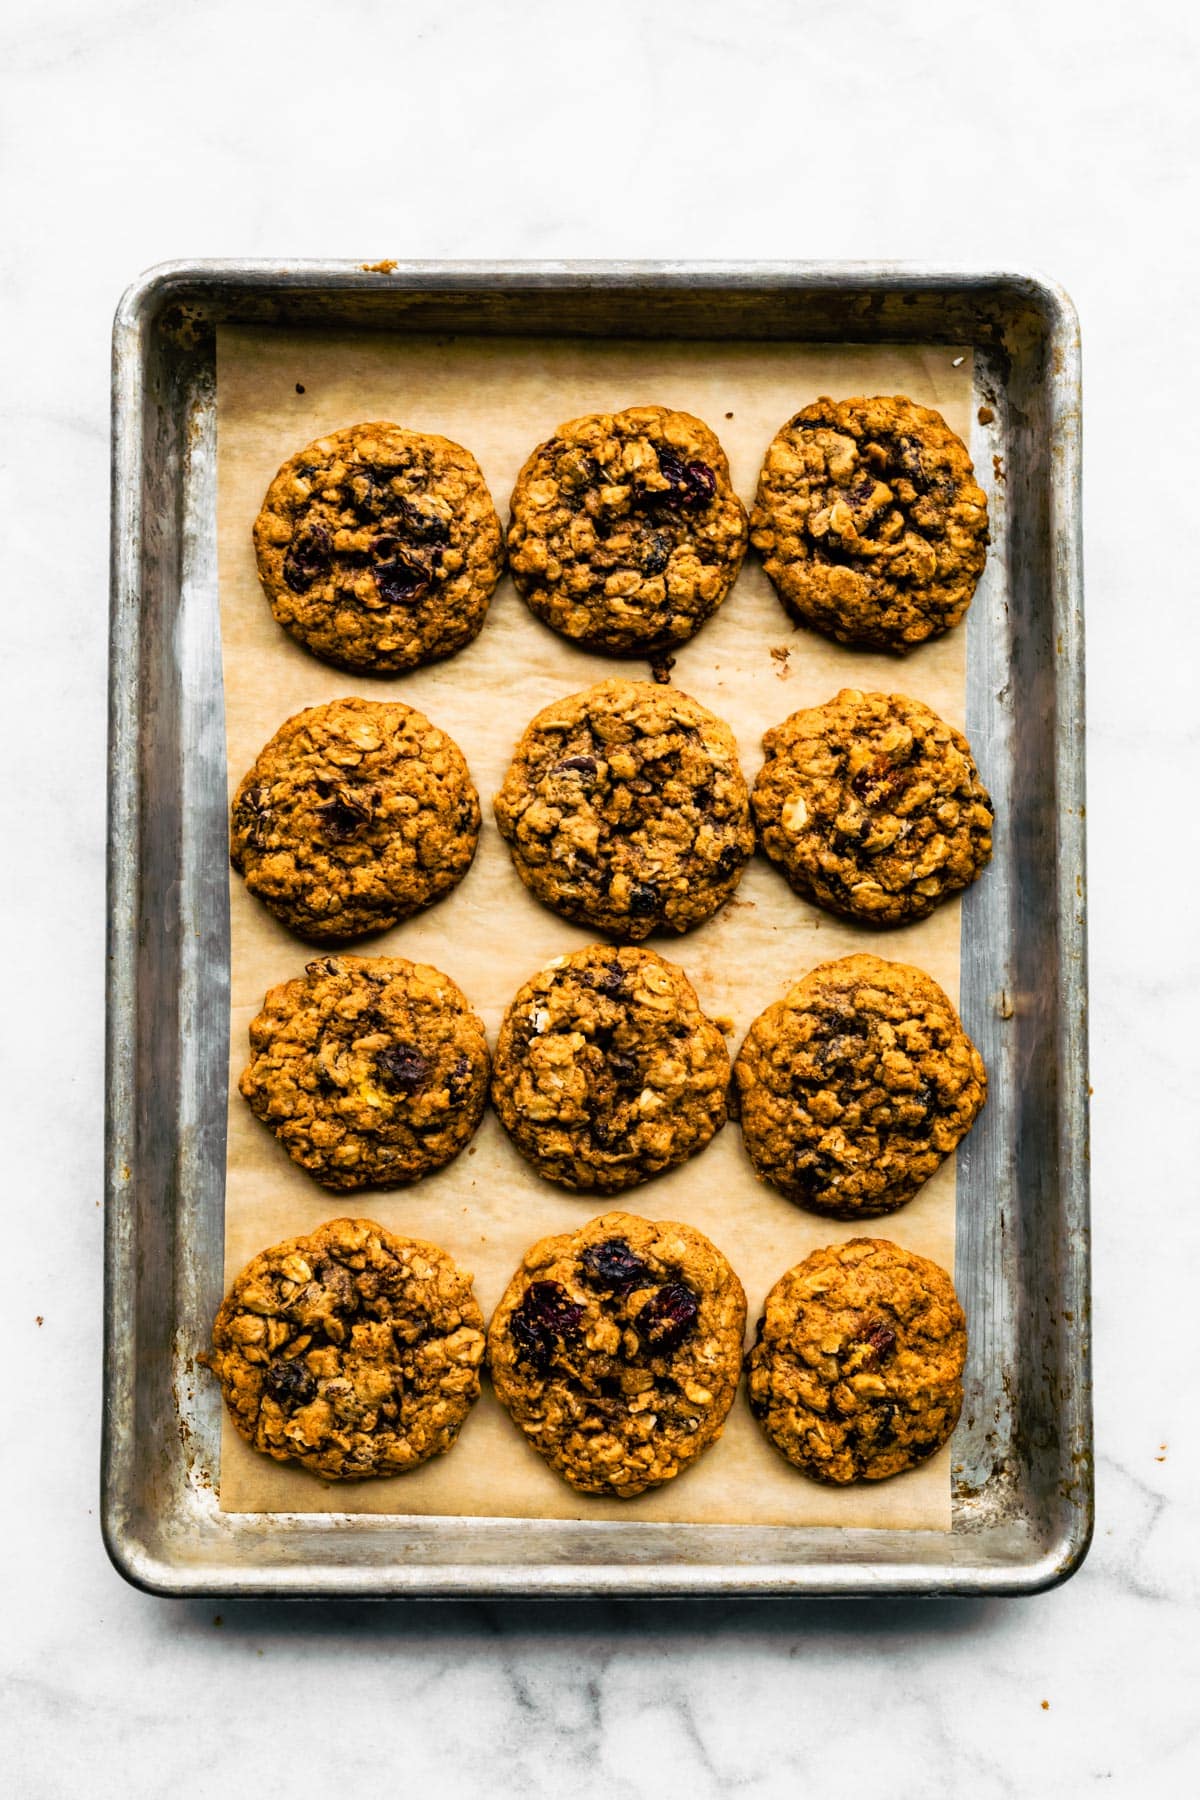 Overhead photo of twelve baked cranberry oatmeal cookies on a metal baking sheet.